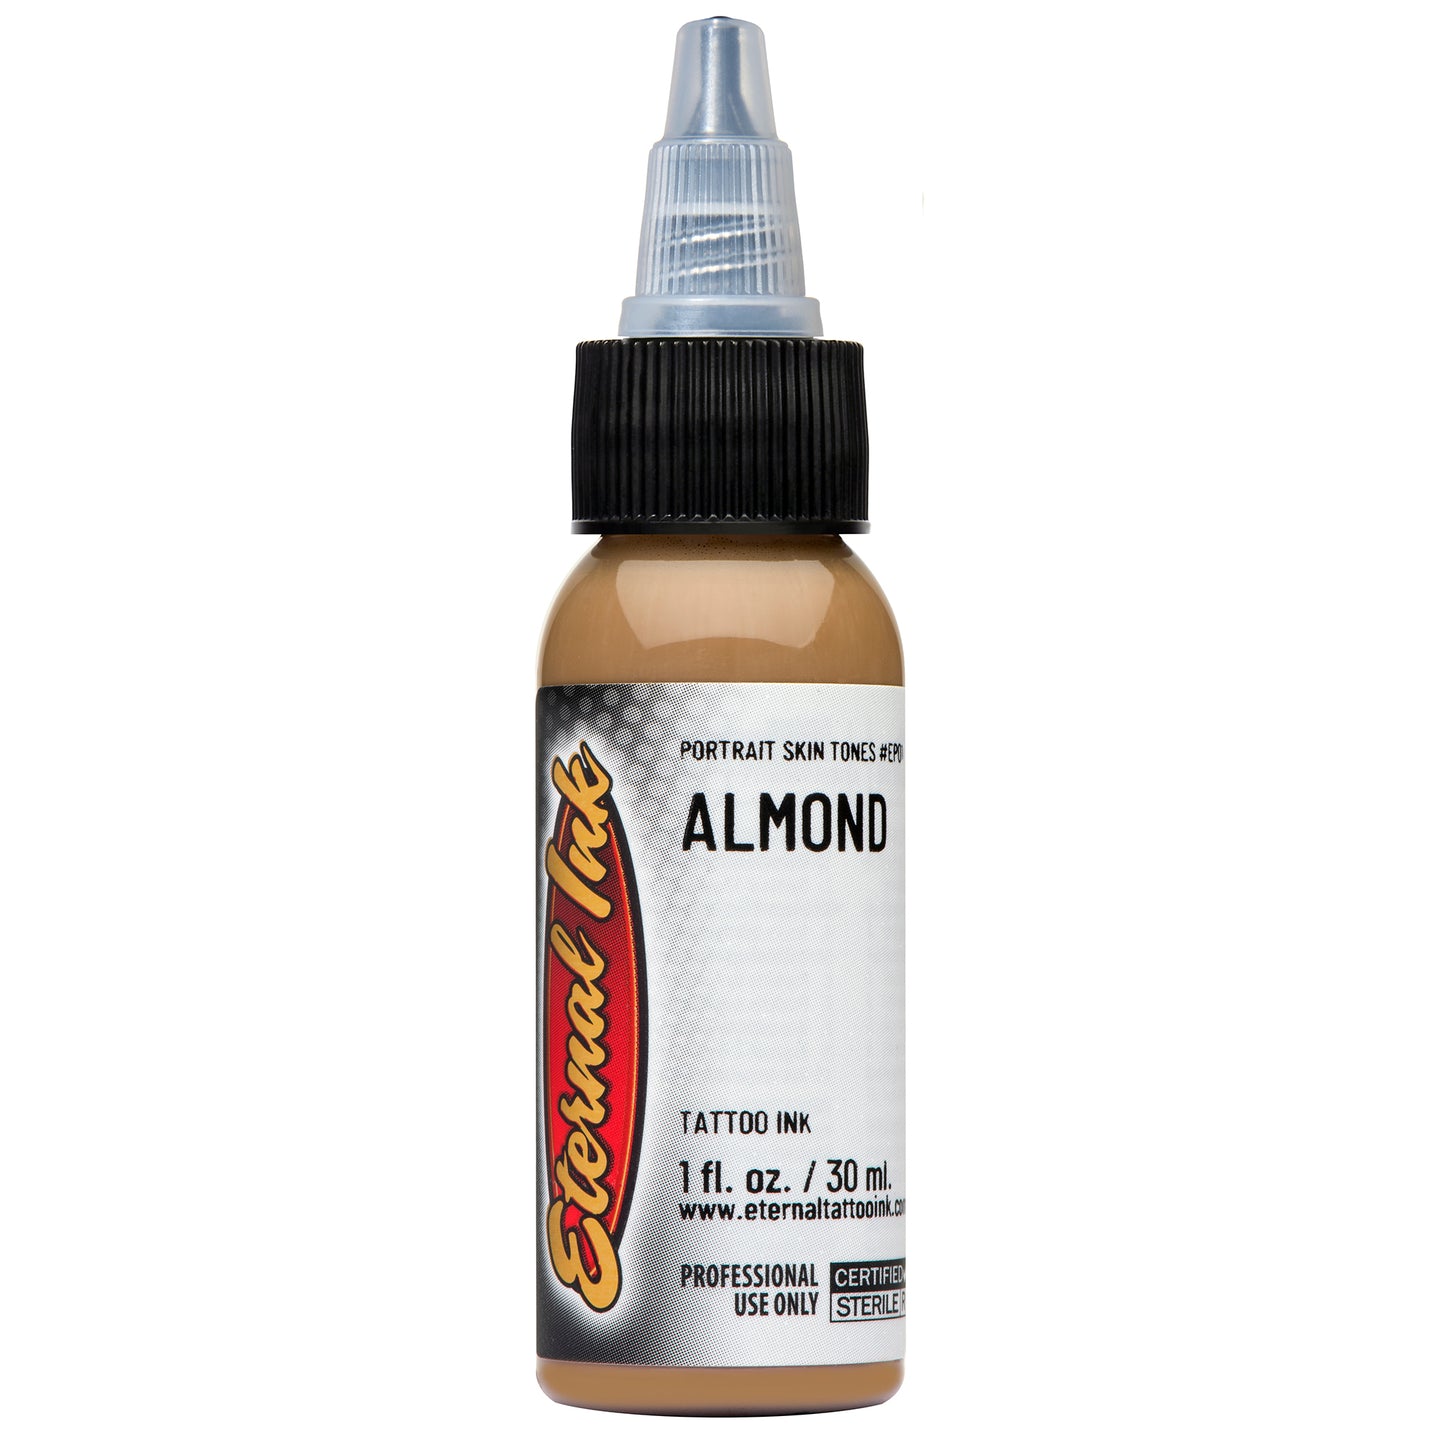 Almond - Eternal Tattoo Ink - Pick Your Size